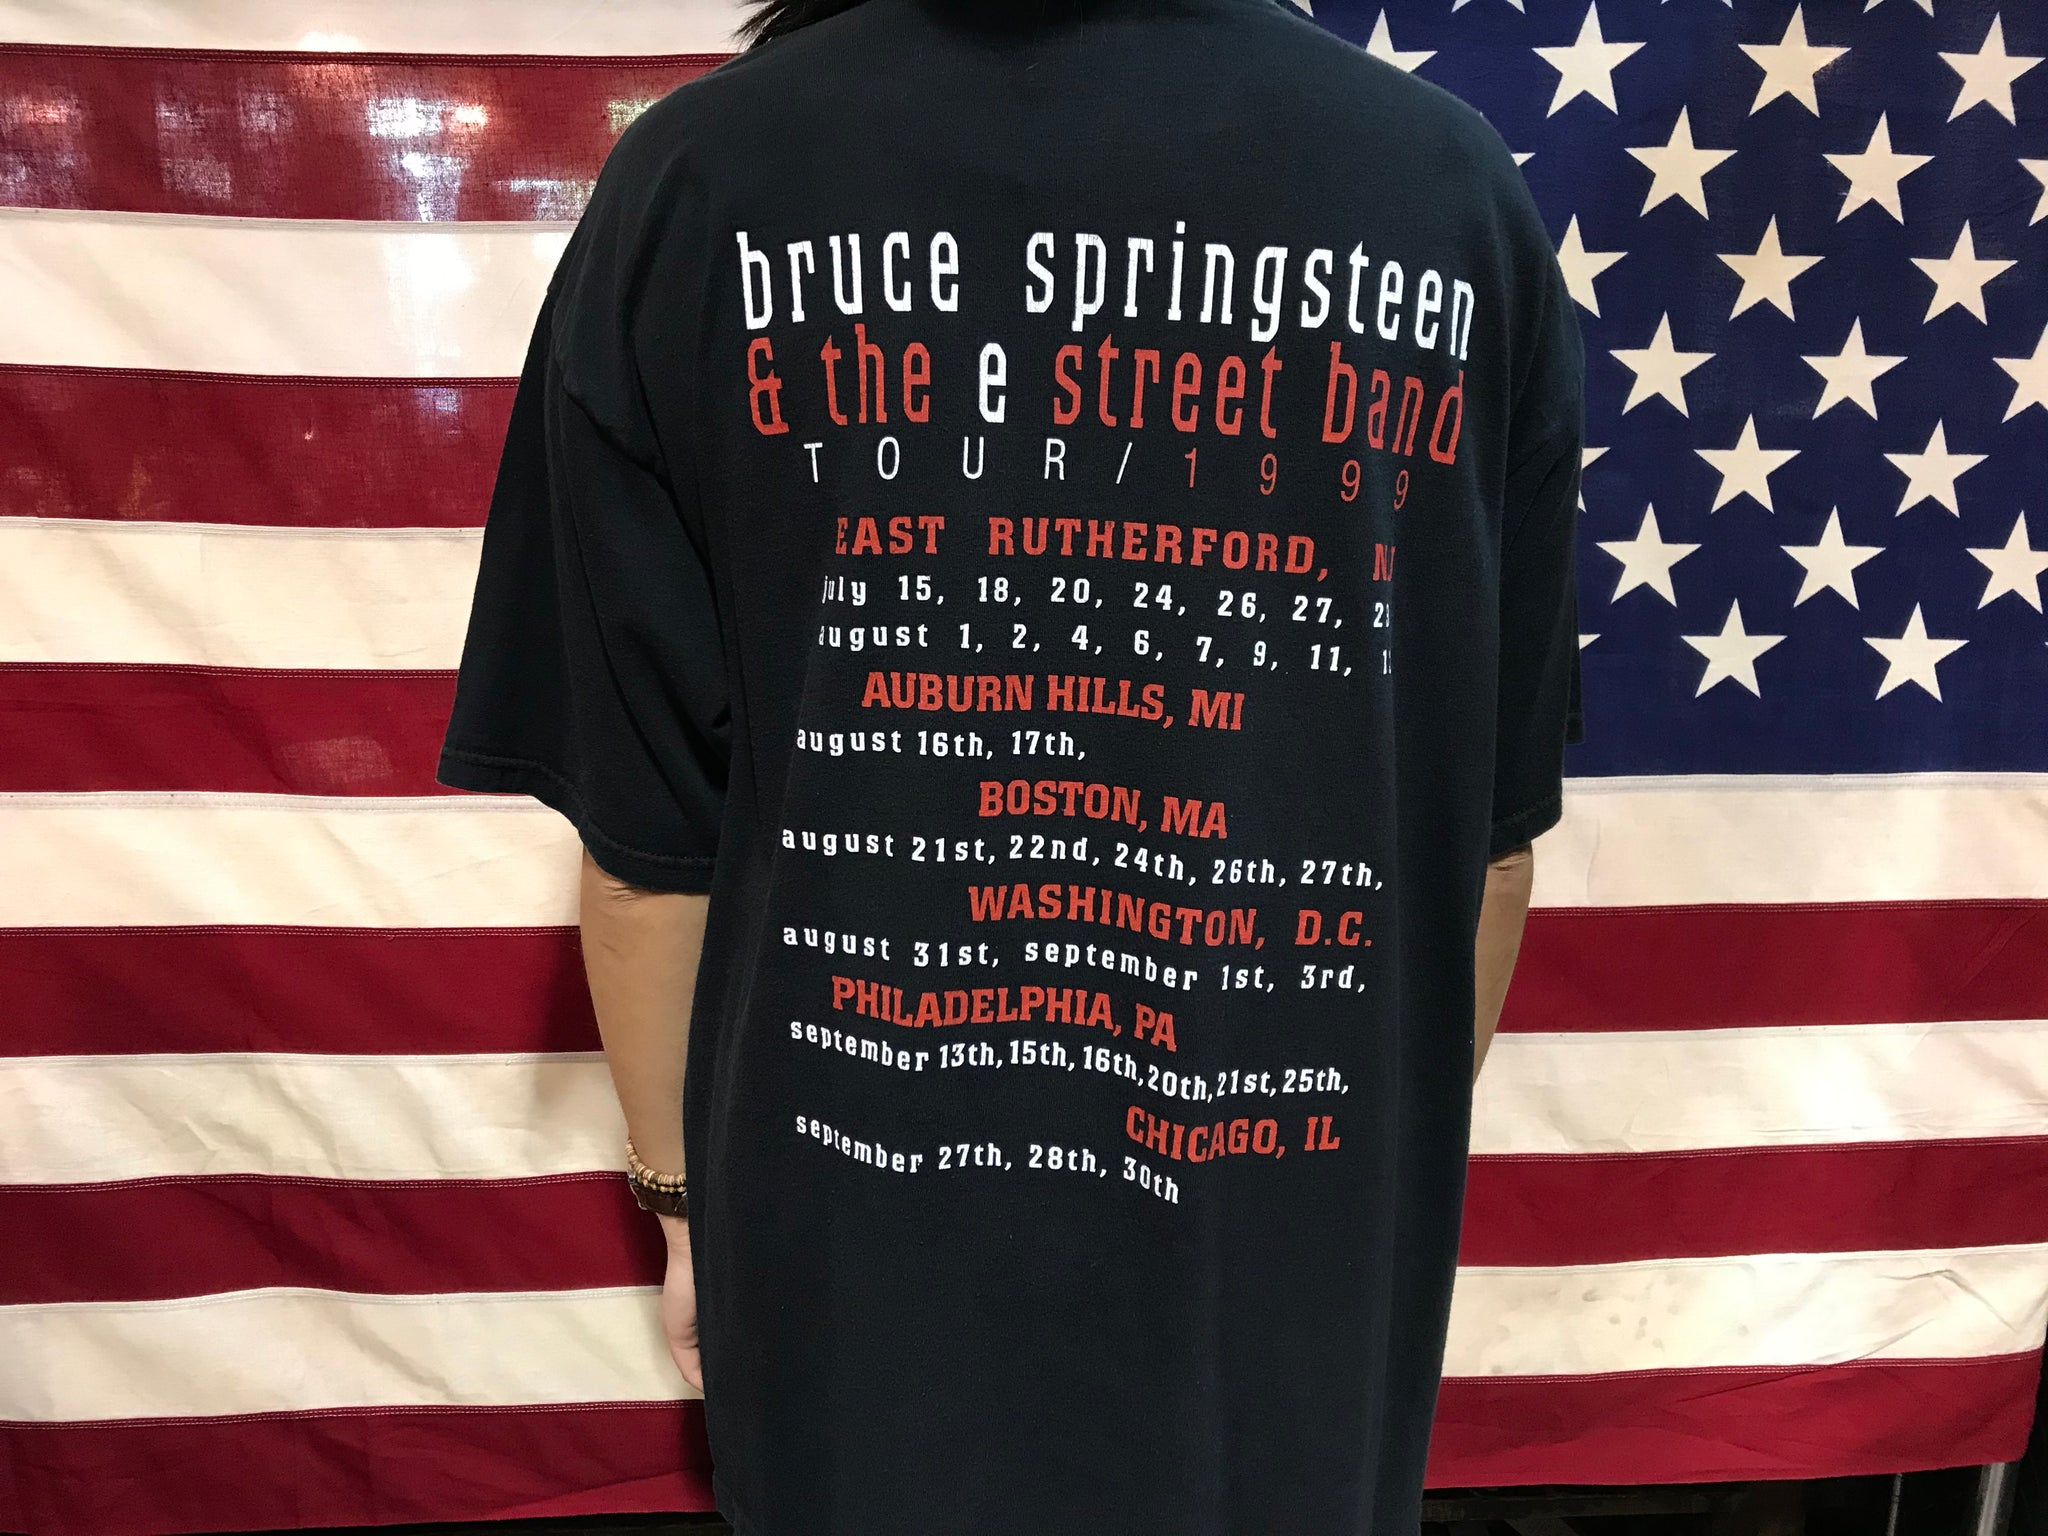 Bruce Springsteen & The E Street Band 1999 Tour Original Vintage Rock T-Shirt Made in USA